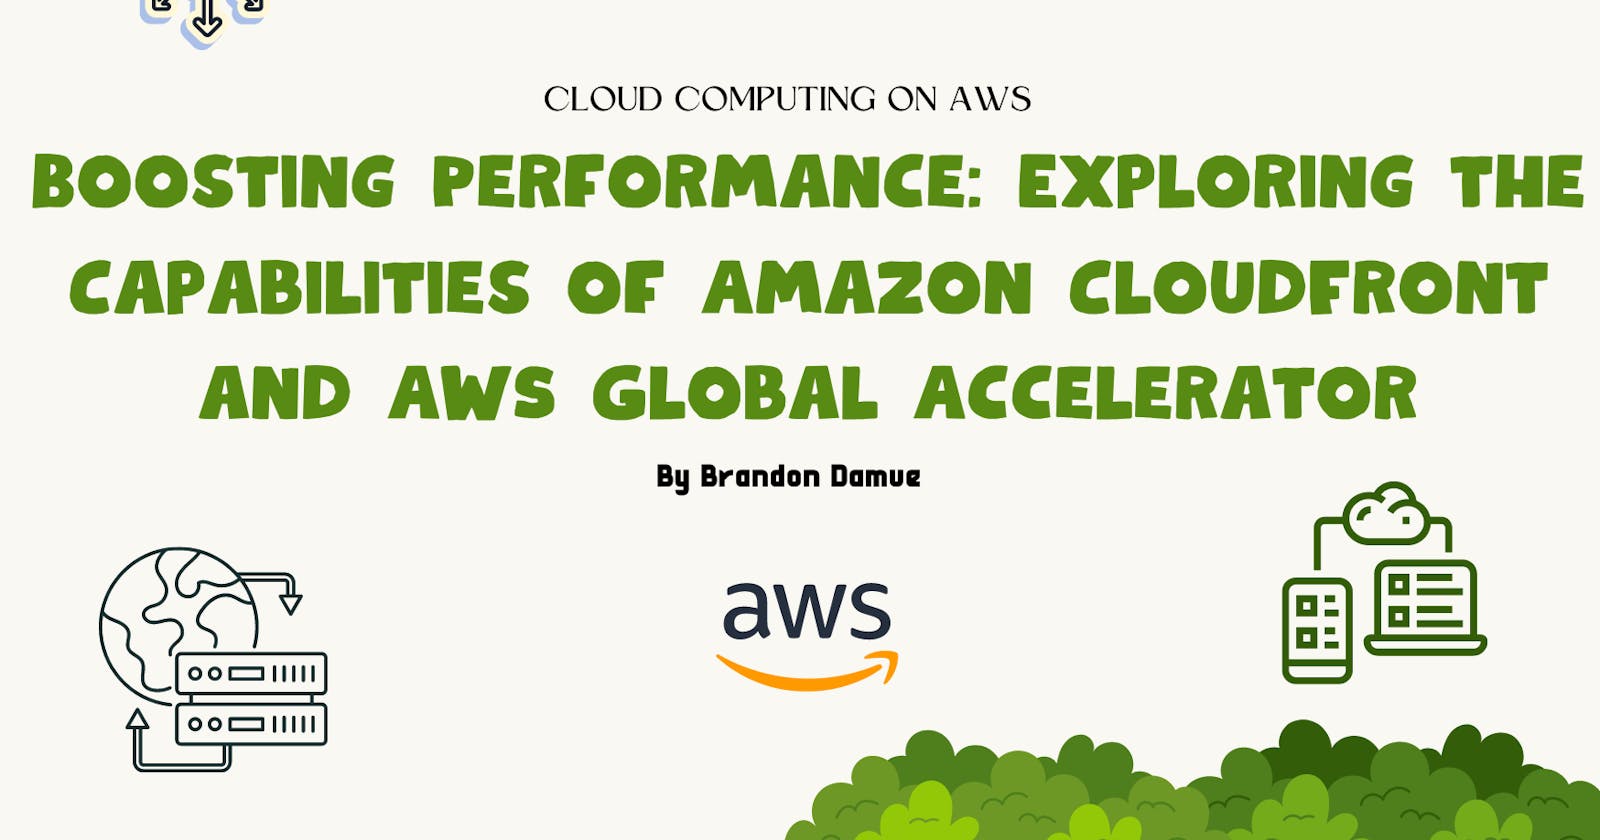 Boosting Performance: Exploring the Capabilities of Amazon CloudFront and AWS Global Accelerator